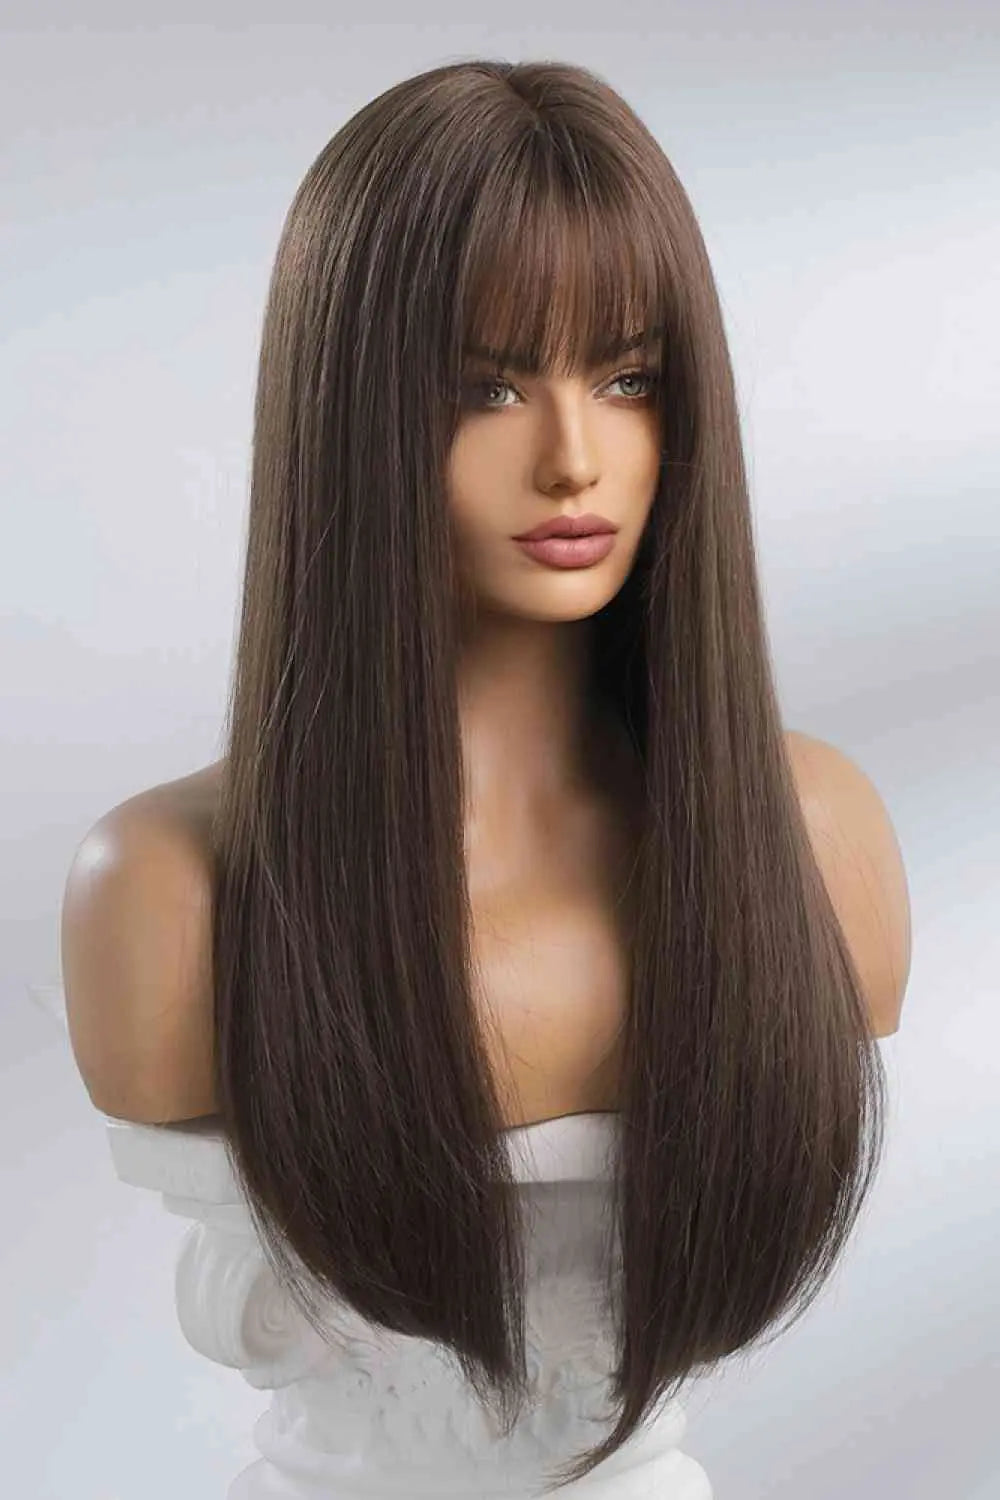 Full Machine Long Straight Synthetic Wigs 26'' - Image #7